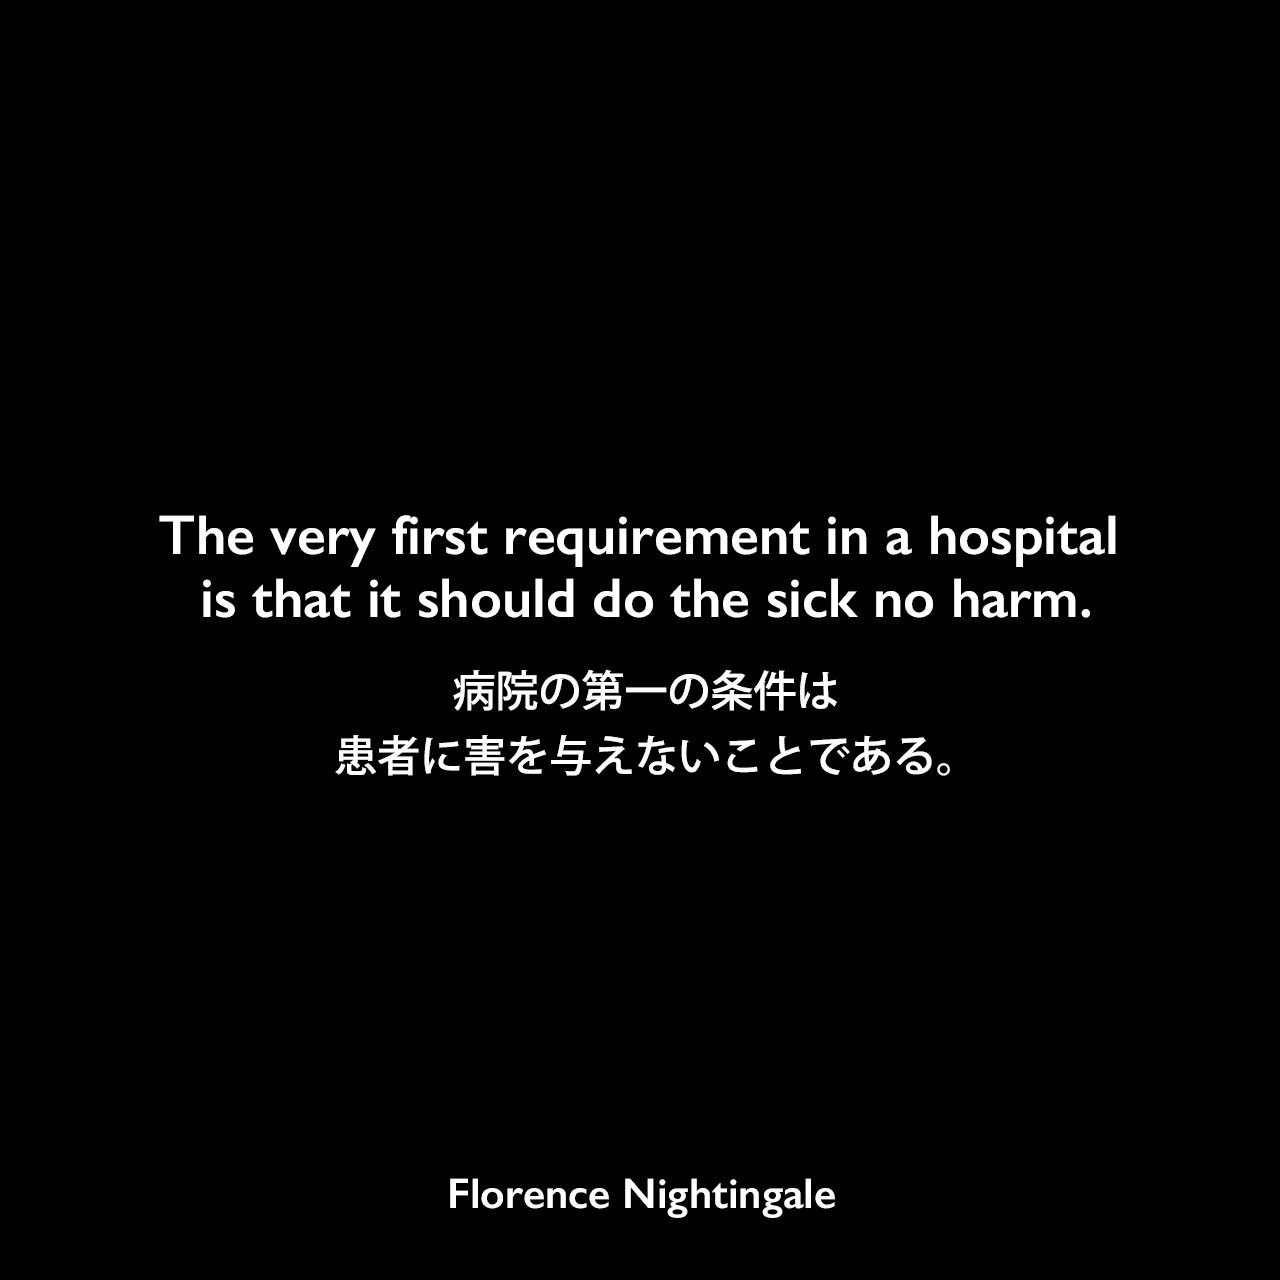 The very first requirement in a hospital is that it should do the sick no harm.病院の第一の条件は、患者に害を与えないことである。- ナイチンゲールの本「Notes on hospitals」よりFlorence Nightingale